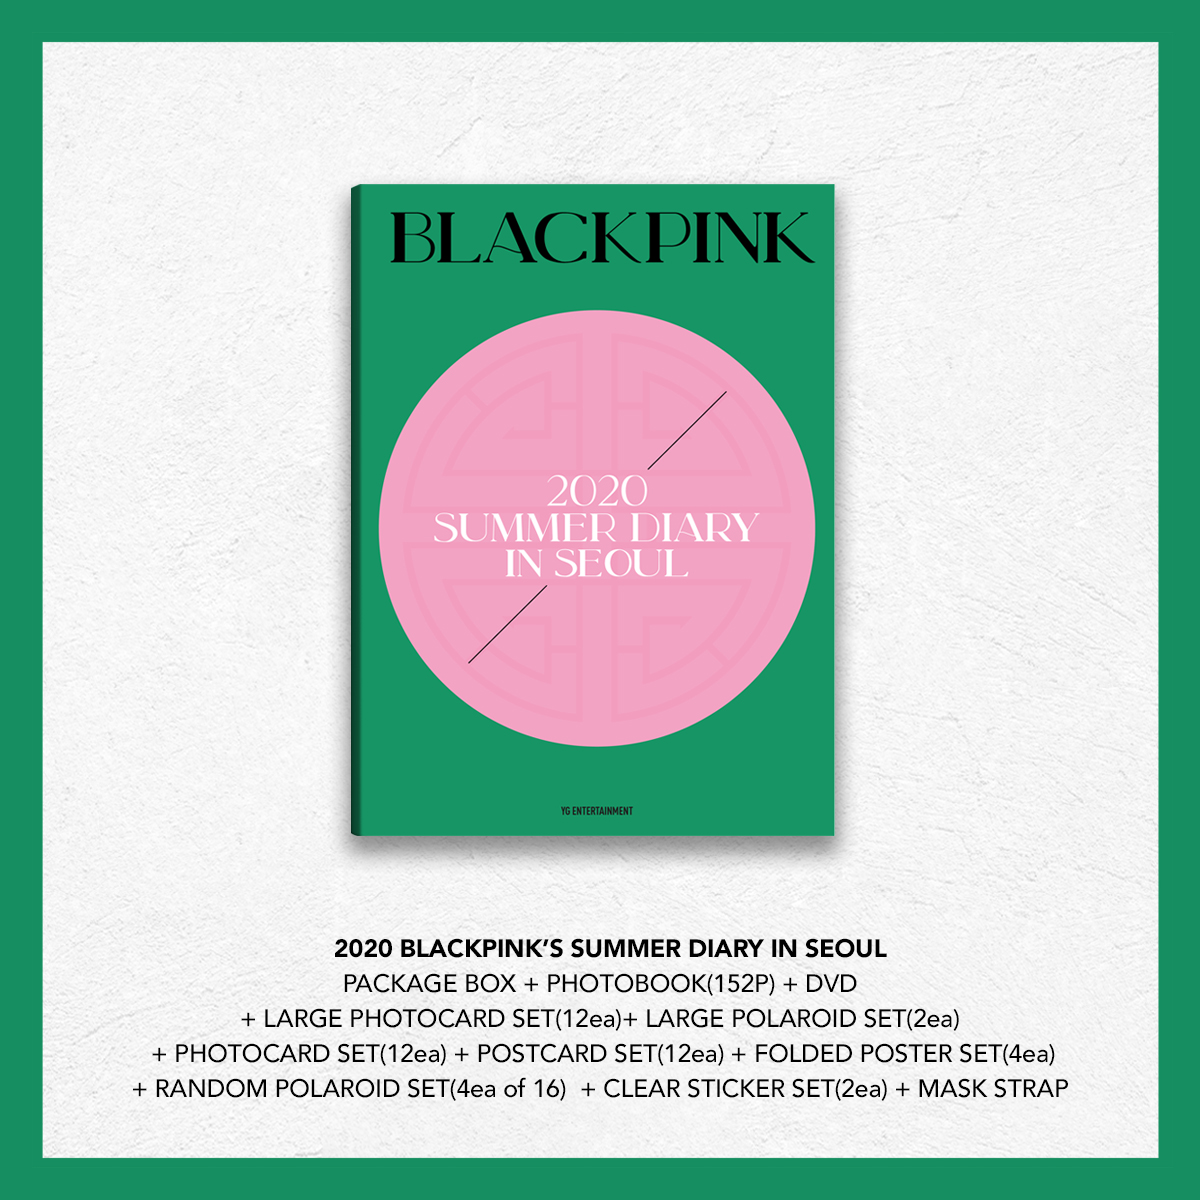 BLACKPINK Summer Diary in Seoul 2020 cover